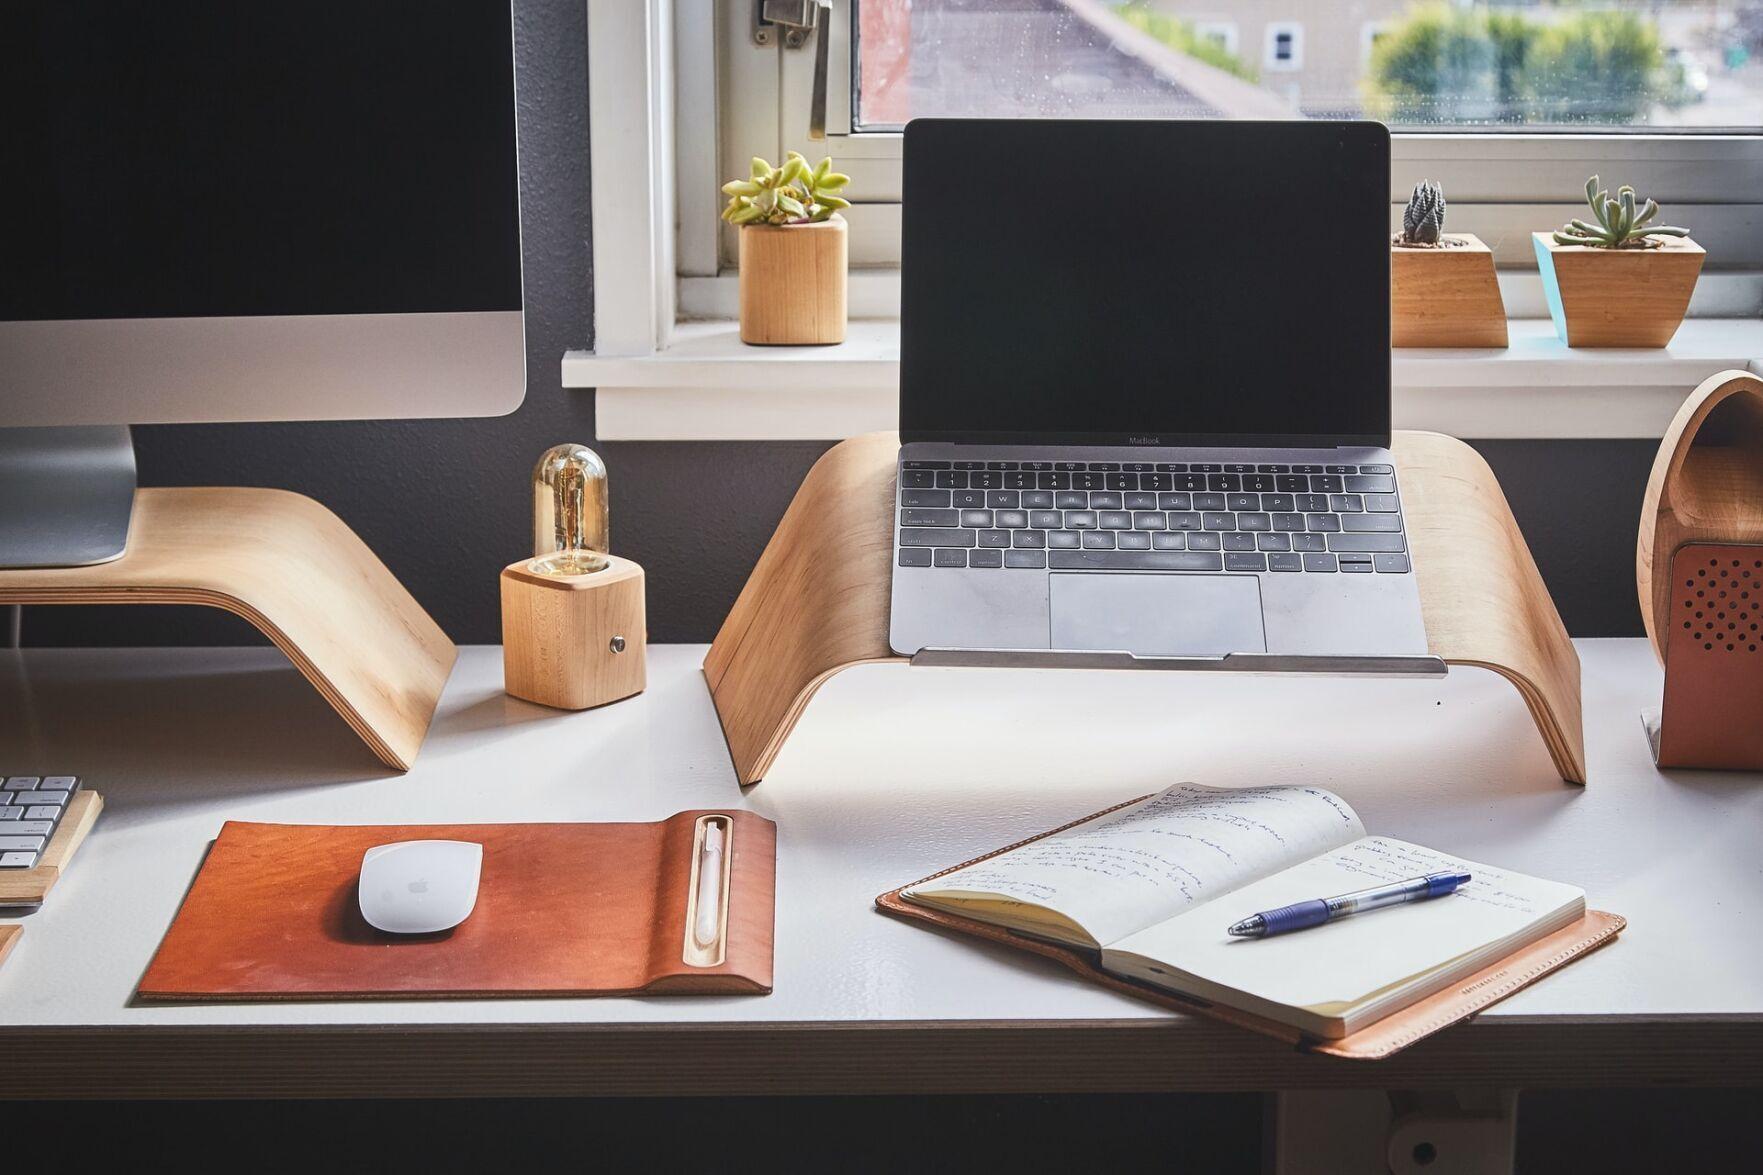 Get your inspiration from these work-from-home setups from TikTok